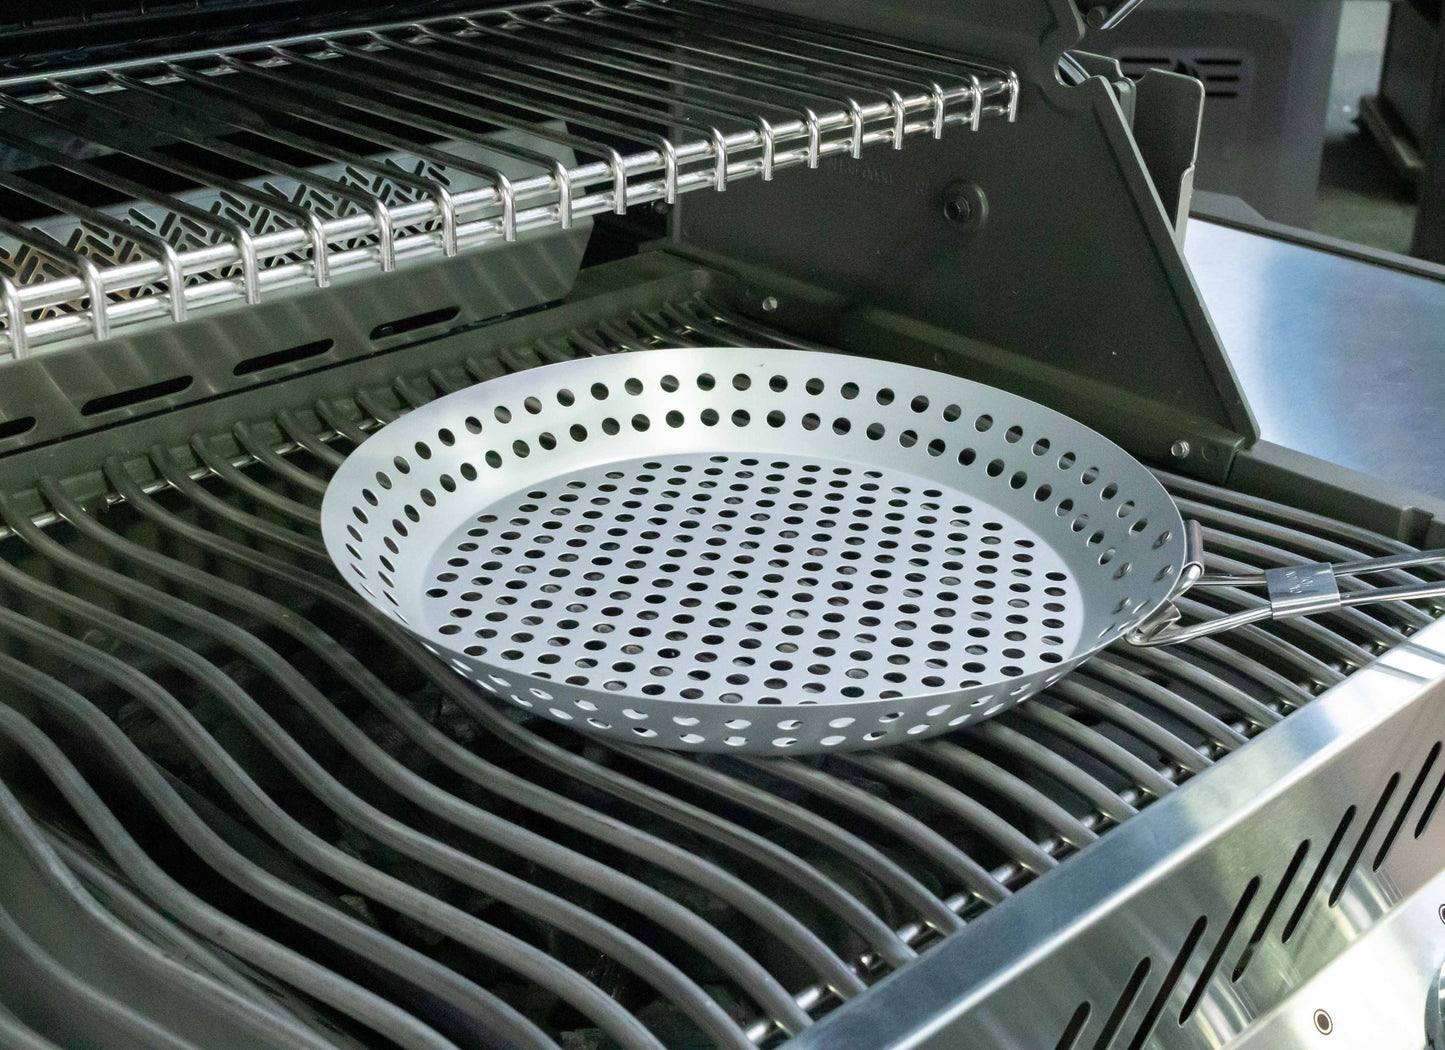 Big Boy Toss & Shake: Round Grill Topper with Foldable Handle